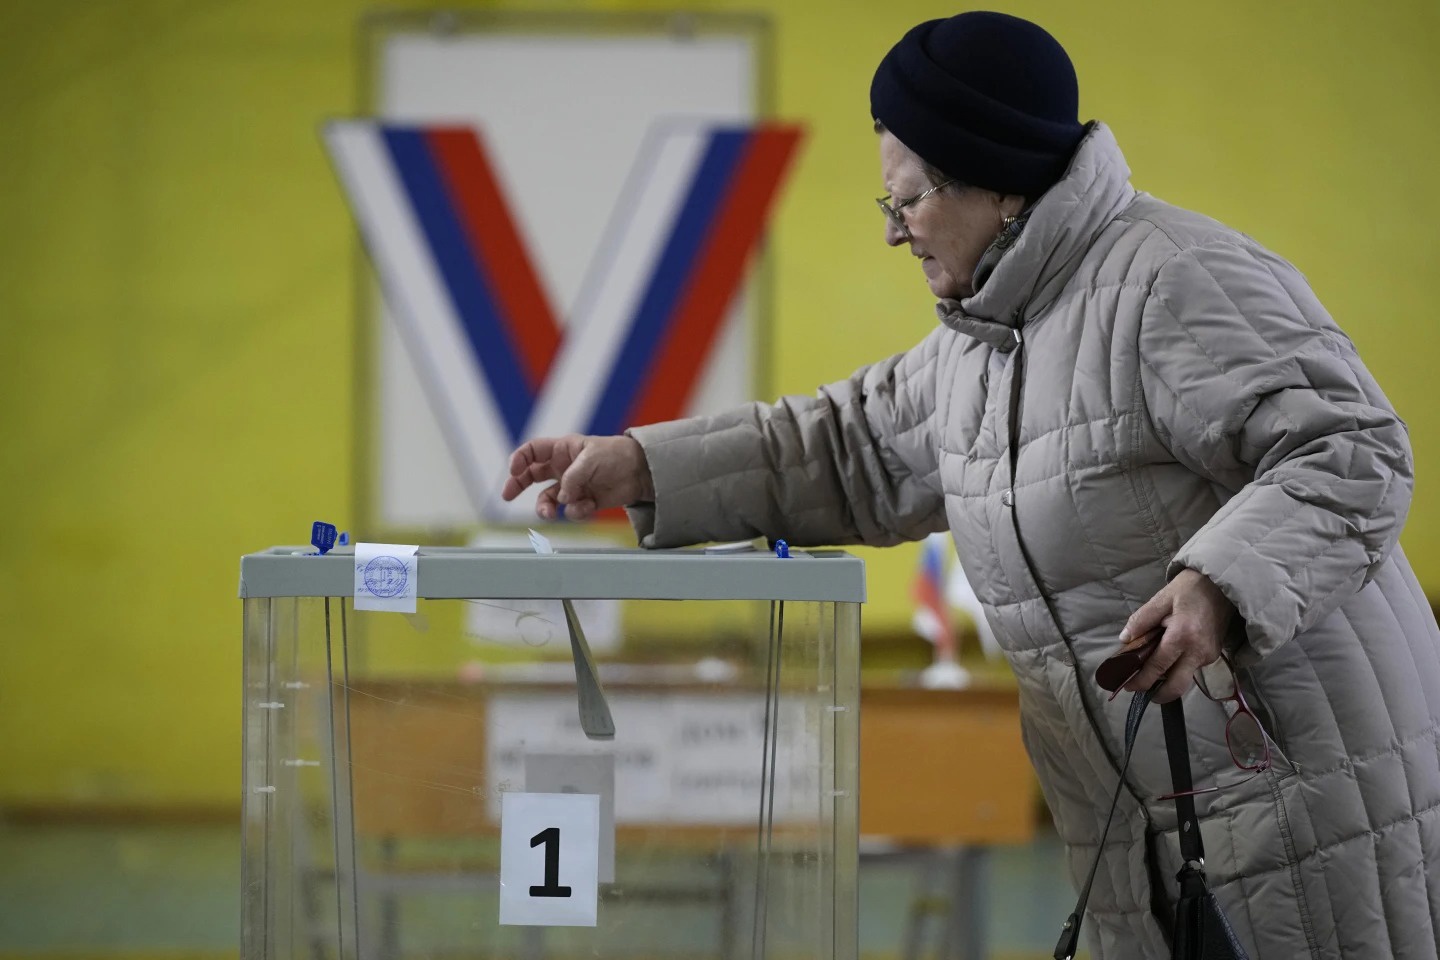 Putin is poised to extend his rule in highly orchestrated vote even as Russians quietly protest